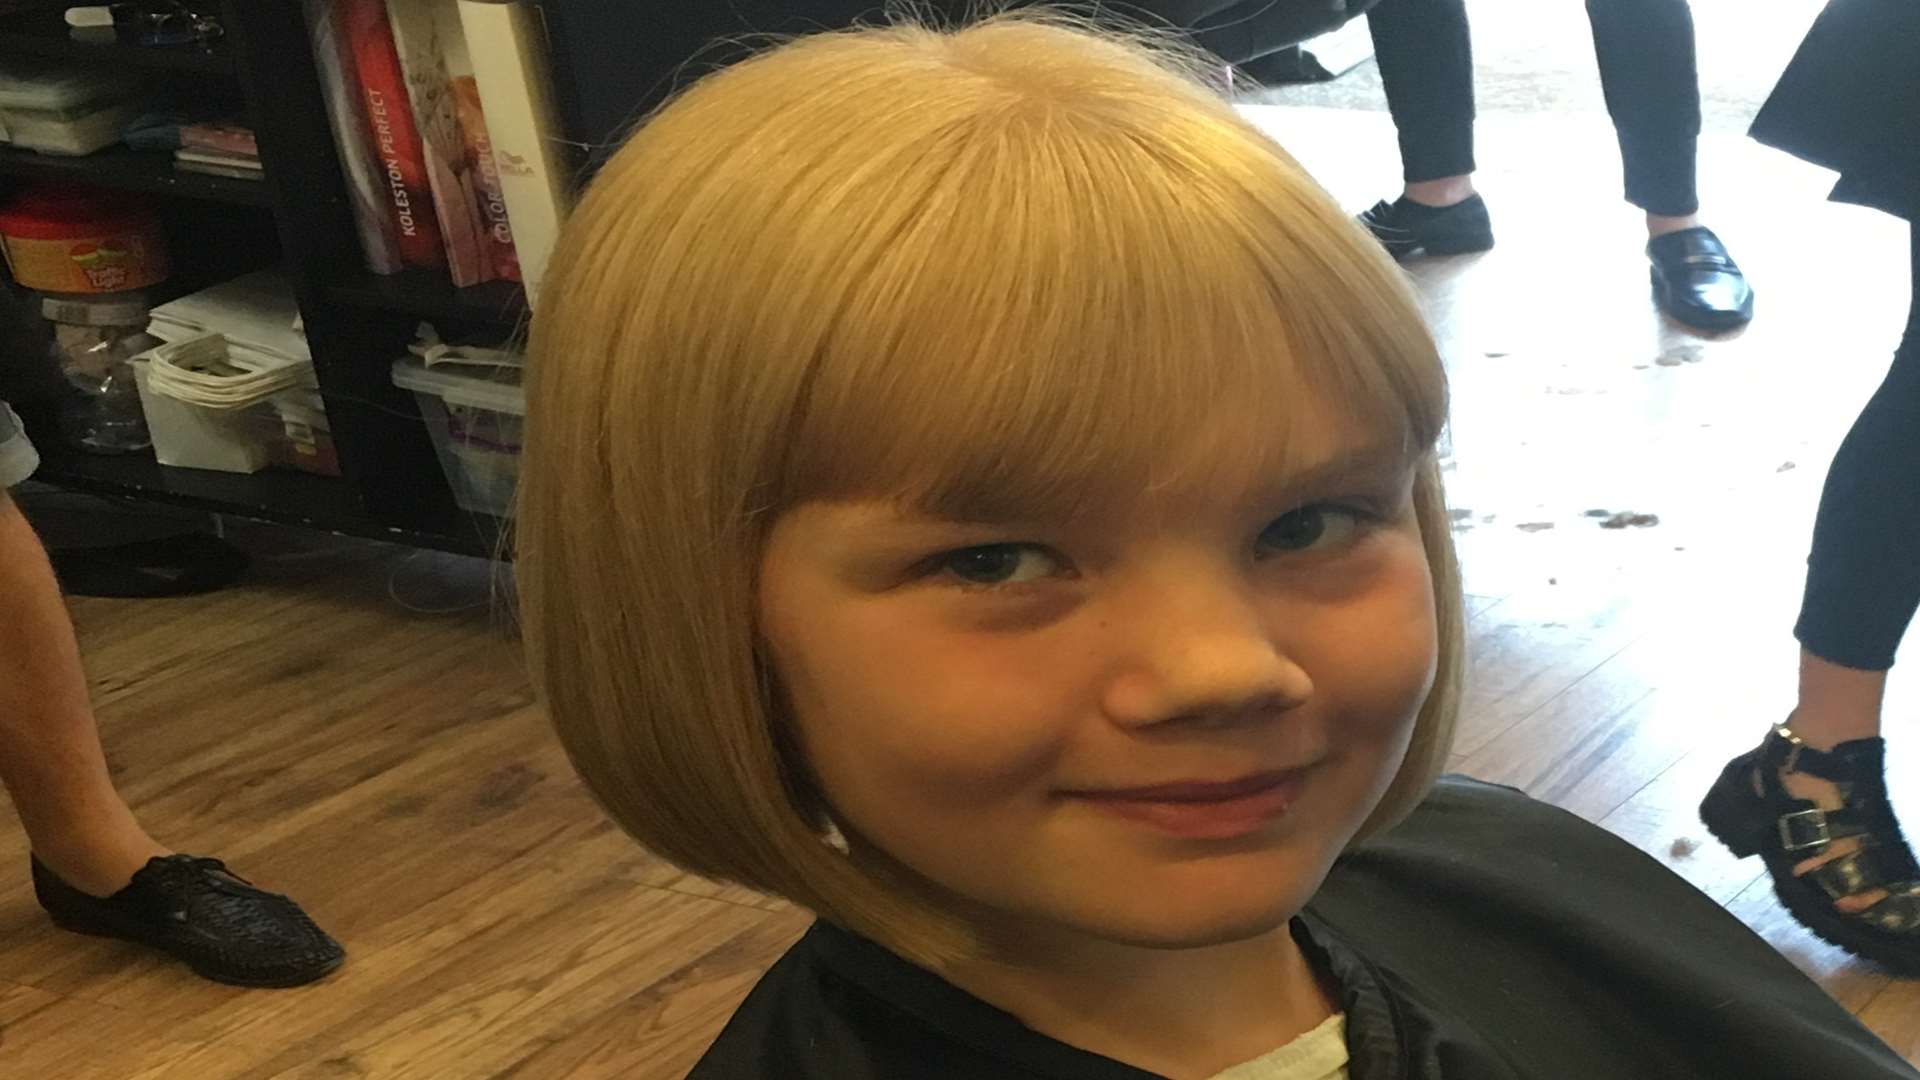 Kaitlyn had 14 inches of her hair chopped off for charity